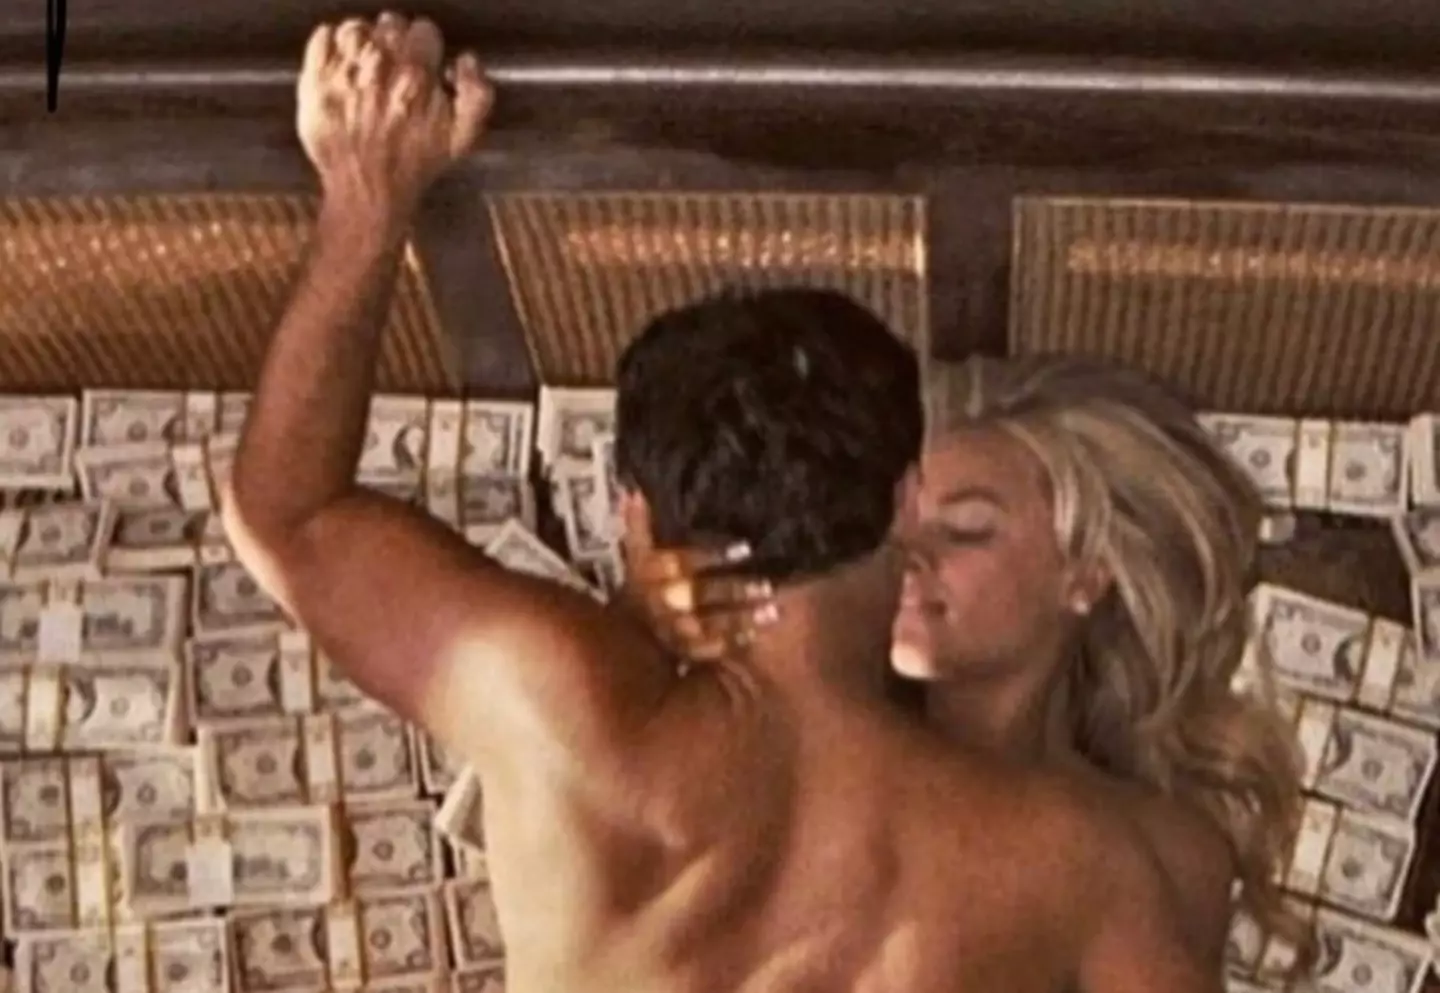 The infamous scene involving Margot Robbie, Leonardo DiCaprio, a bed and a lot of fake cash.